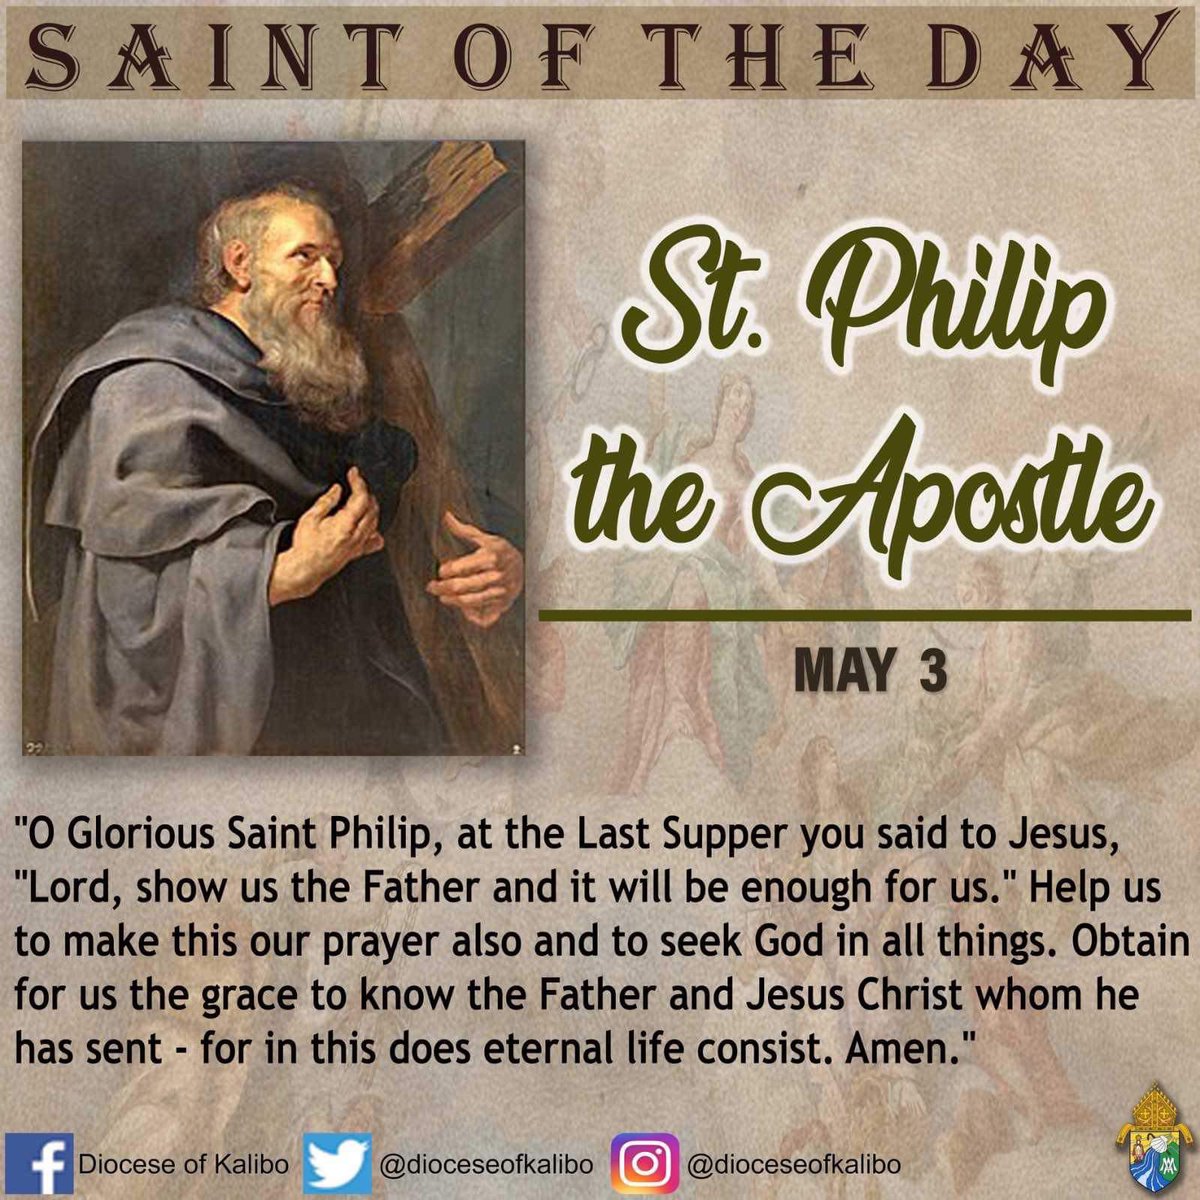 SAINT OF THE DAY

May 3 | St. Philip the Apostle
 
St. Philip the Apostle, pray for us! 🙏🏻

#SaintOfTheDay #SaintPhilipTheApostle #May3 #Socom #DioceseOfKalibo